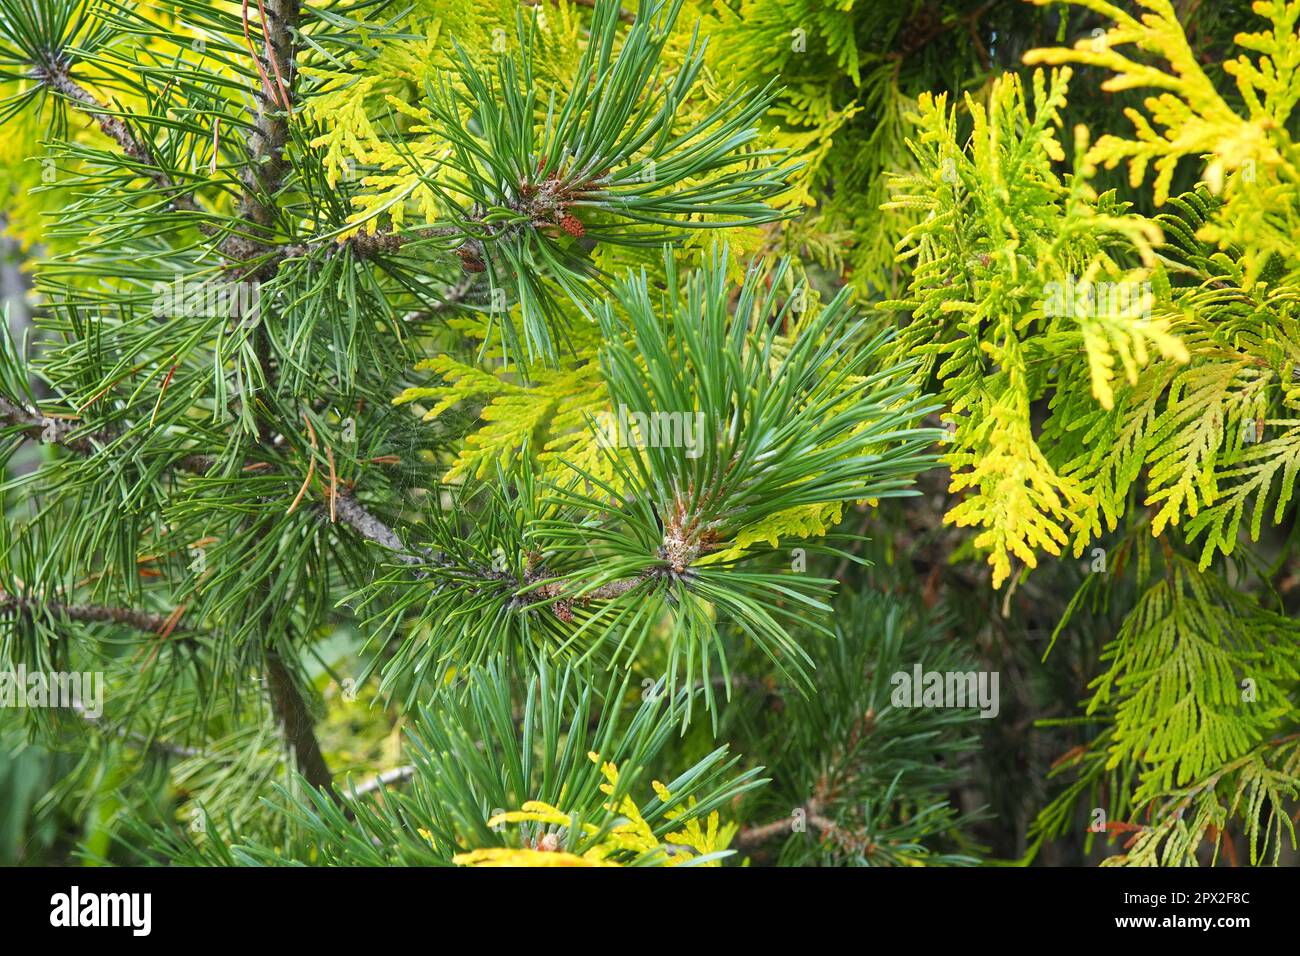 Shaping the crown of thuja. Garden and park. Floriculture and horticulture. Landscaping of urban and rural areas. Yellow-green leaves and needles of c Stock Photo